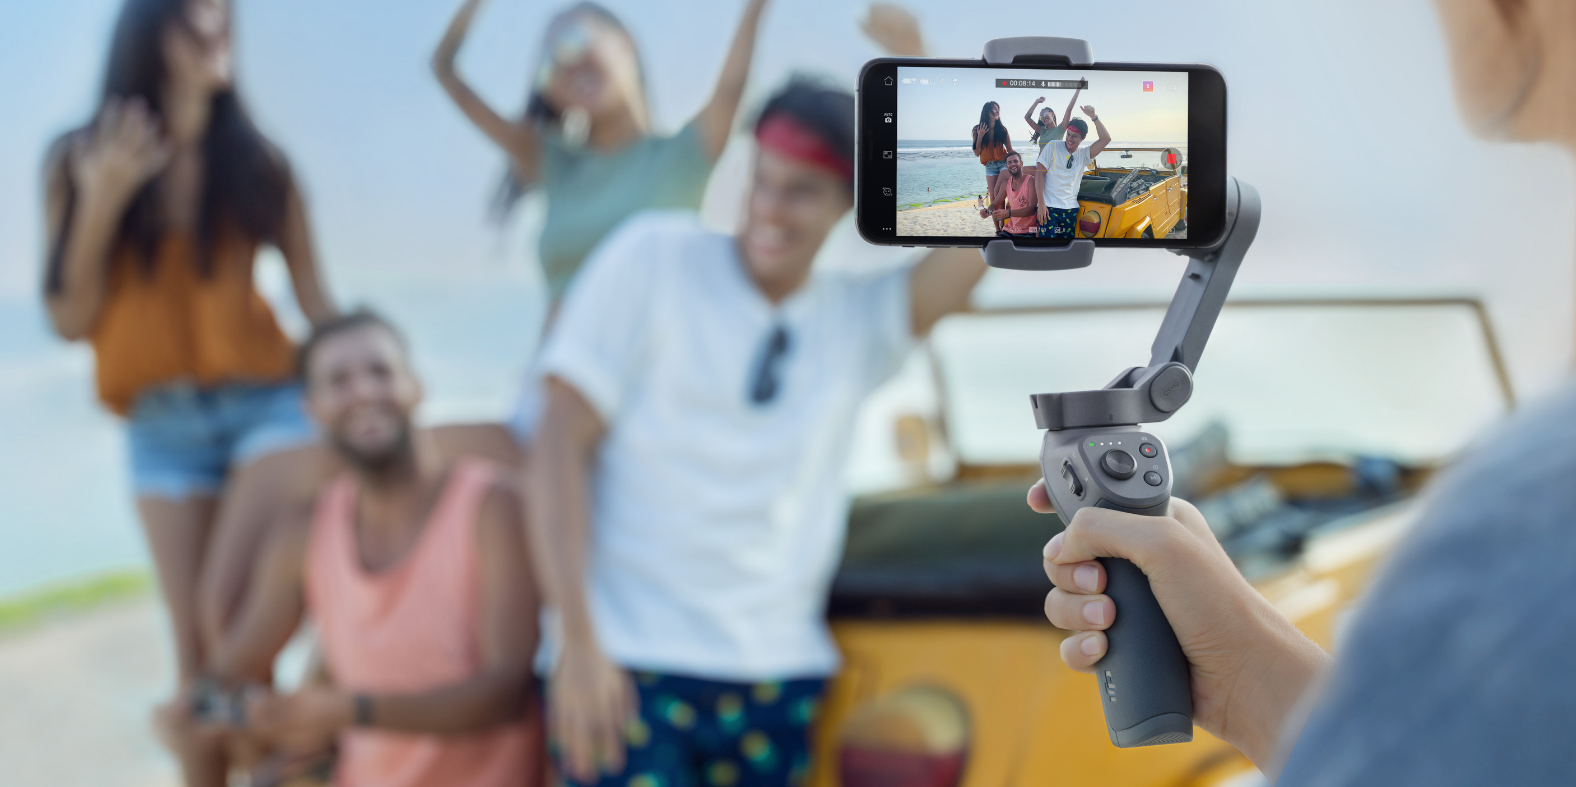 DJI Releases New Osmo Mobile 3 | The Foldable Smartphone Gimbal